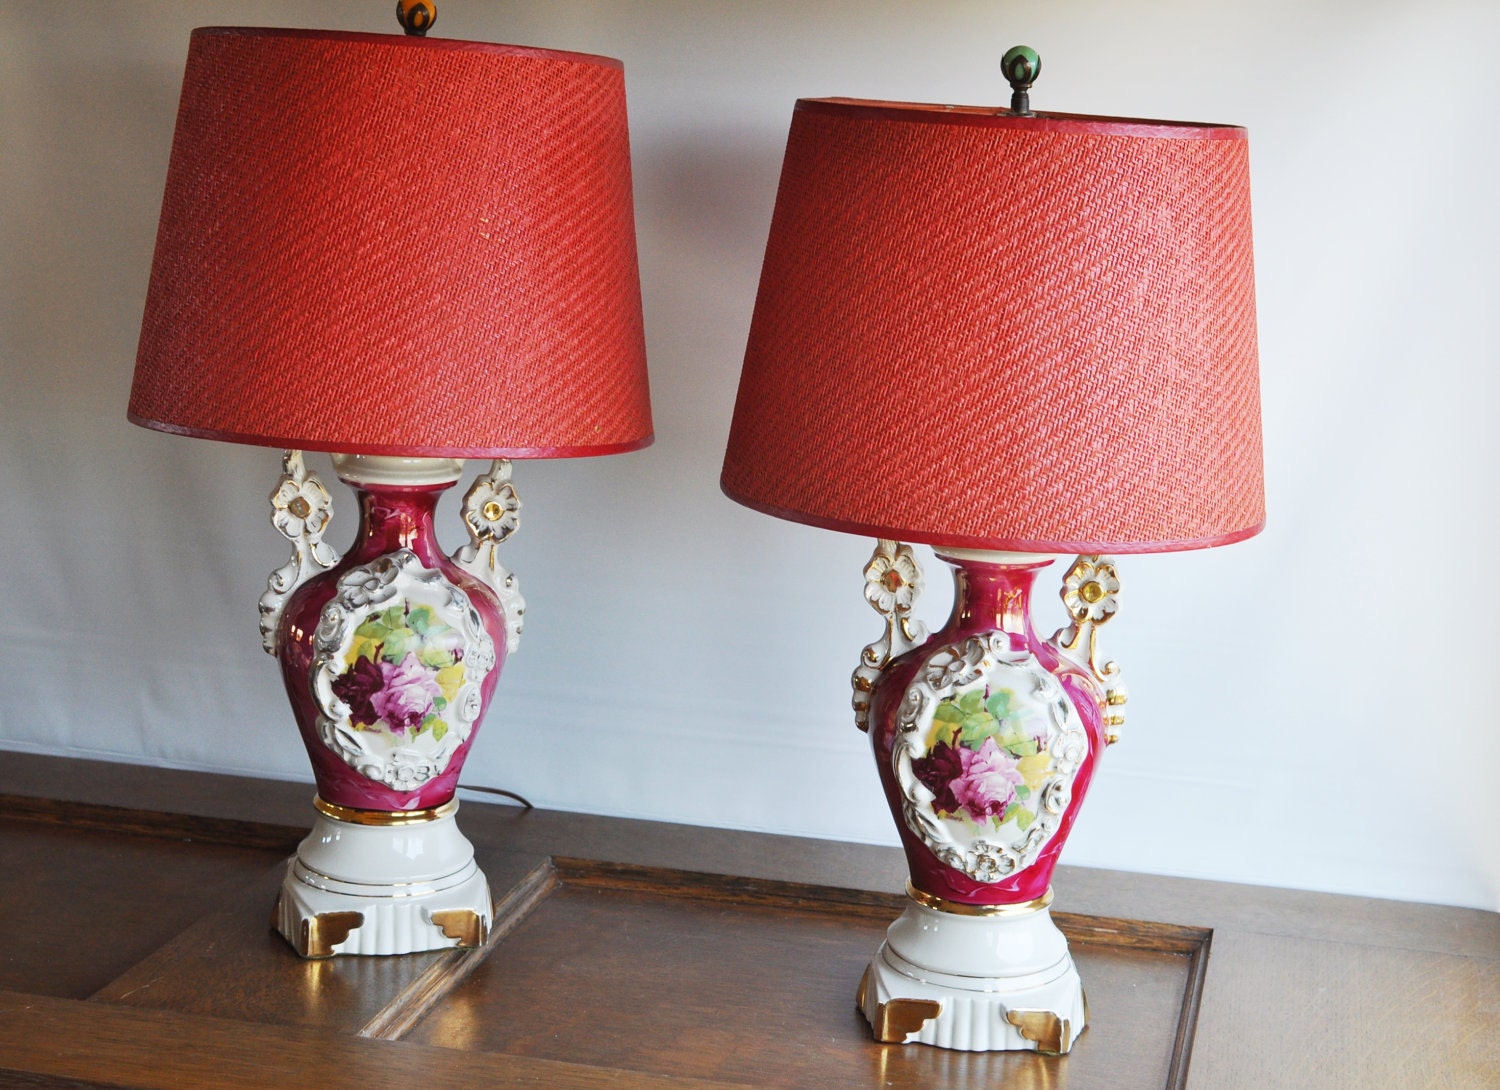 Vintage Pair Floral Ceramic Table Lamps with Woven Red Shades